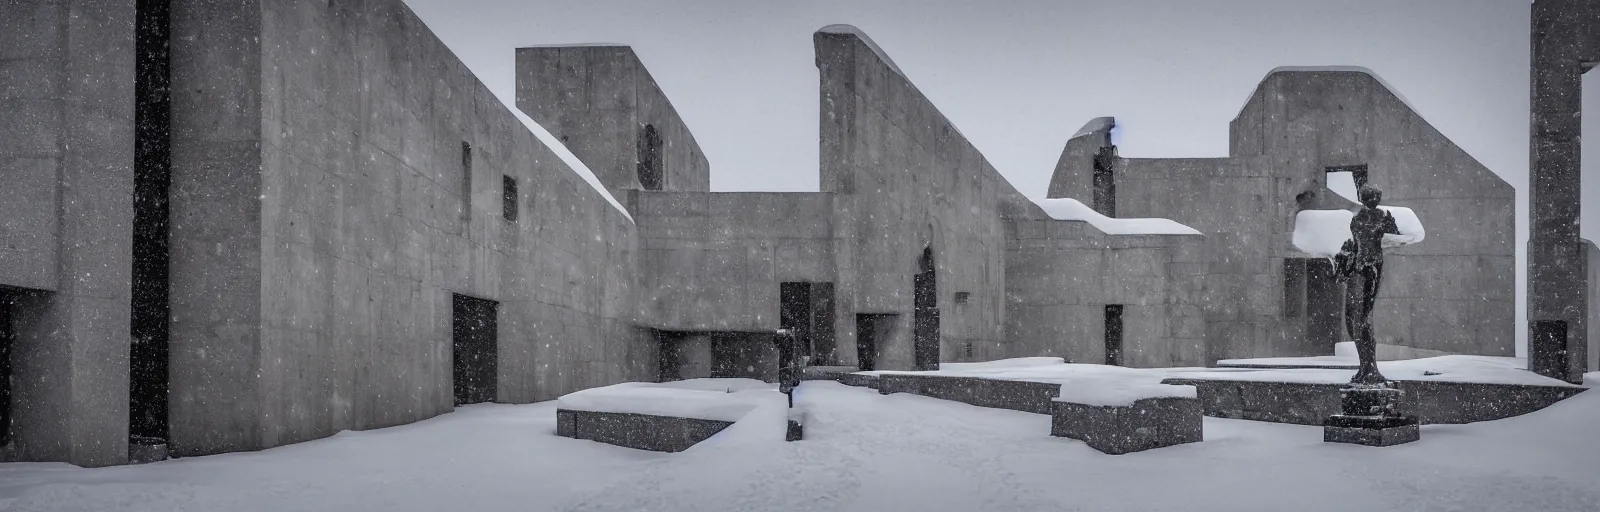 Image similar to snow falling on brutalist monastery, the monastery is on top of a black snowy mountain, the concrete monastery has walkways, skybridges, stairways, white marble statues on pedestals in the background, depth of field, sharp focus, clear focus, beautiful, award winning architecture, hopeful, quiet, calm, serene